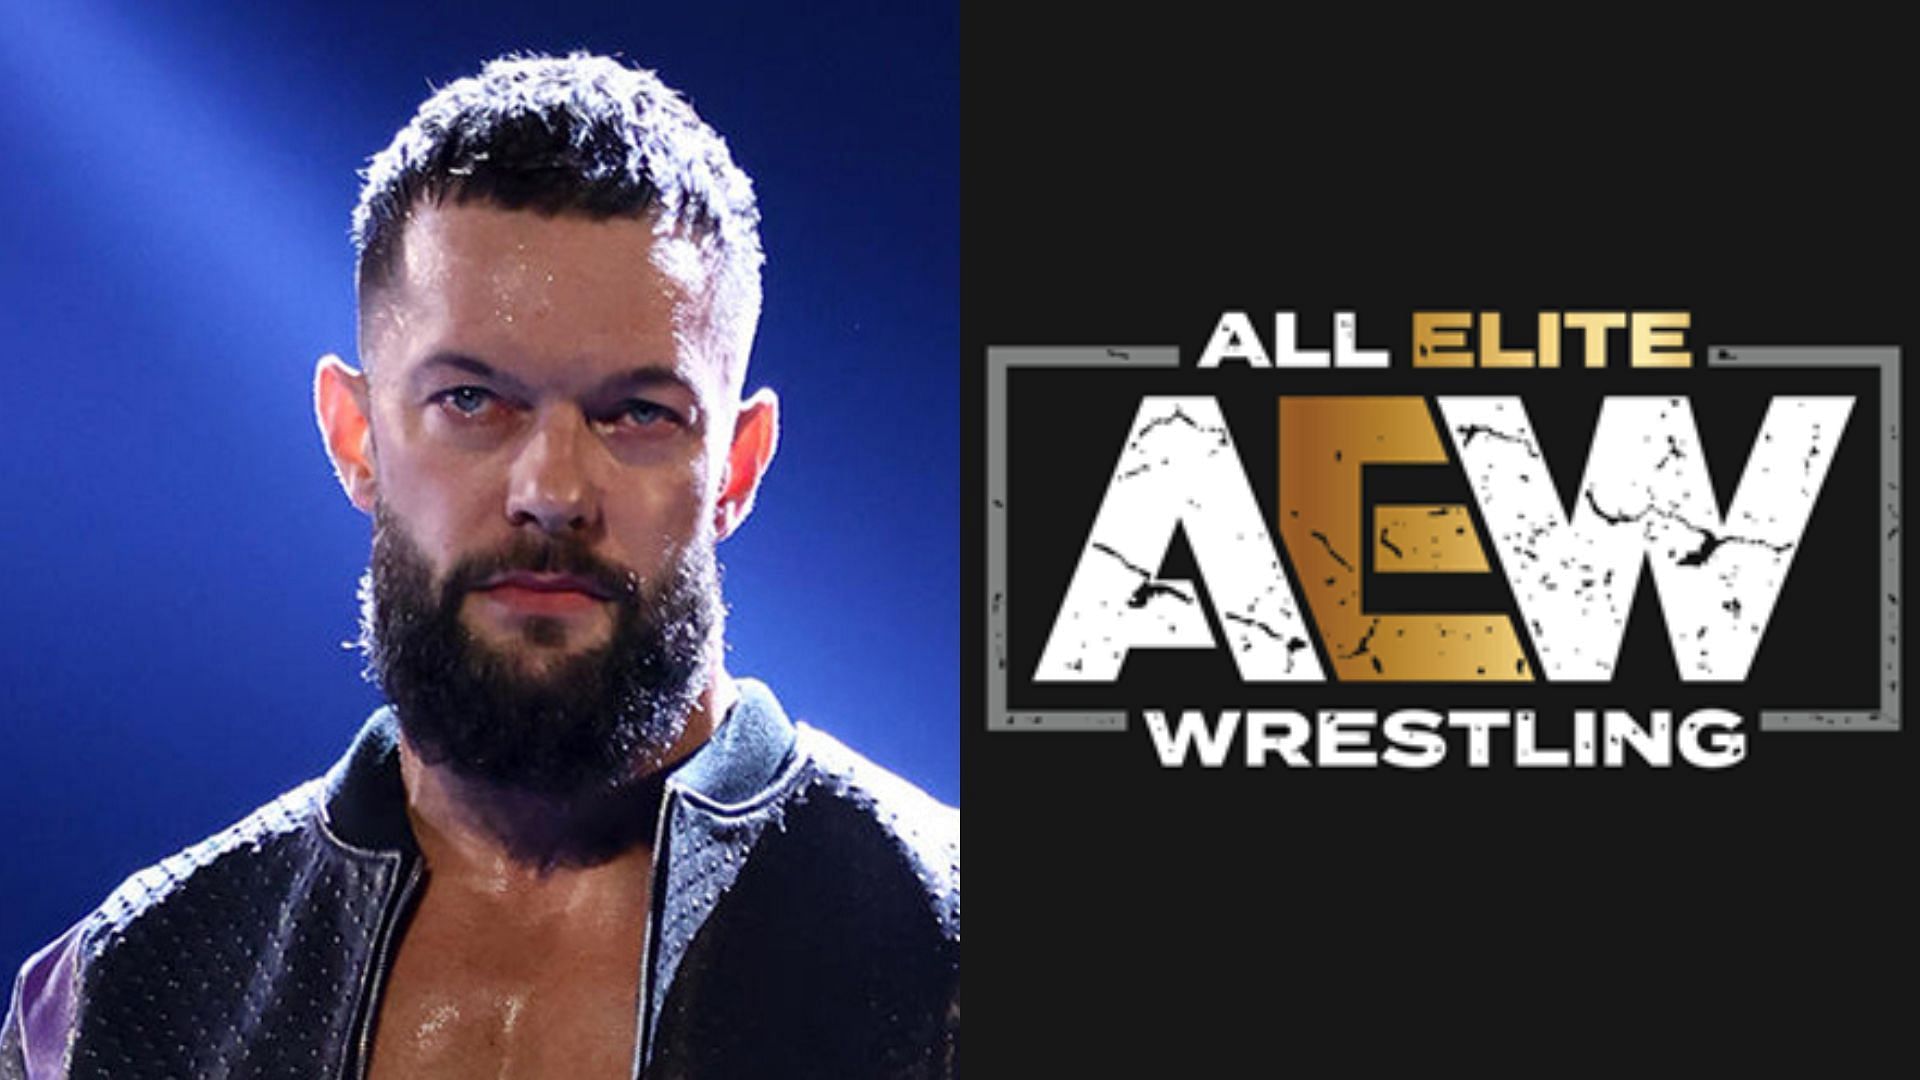 [Photo] Top WWE Superstar seemingly references Finn Balor and AEW star ...